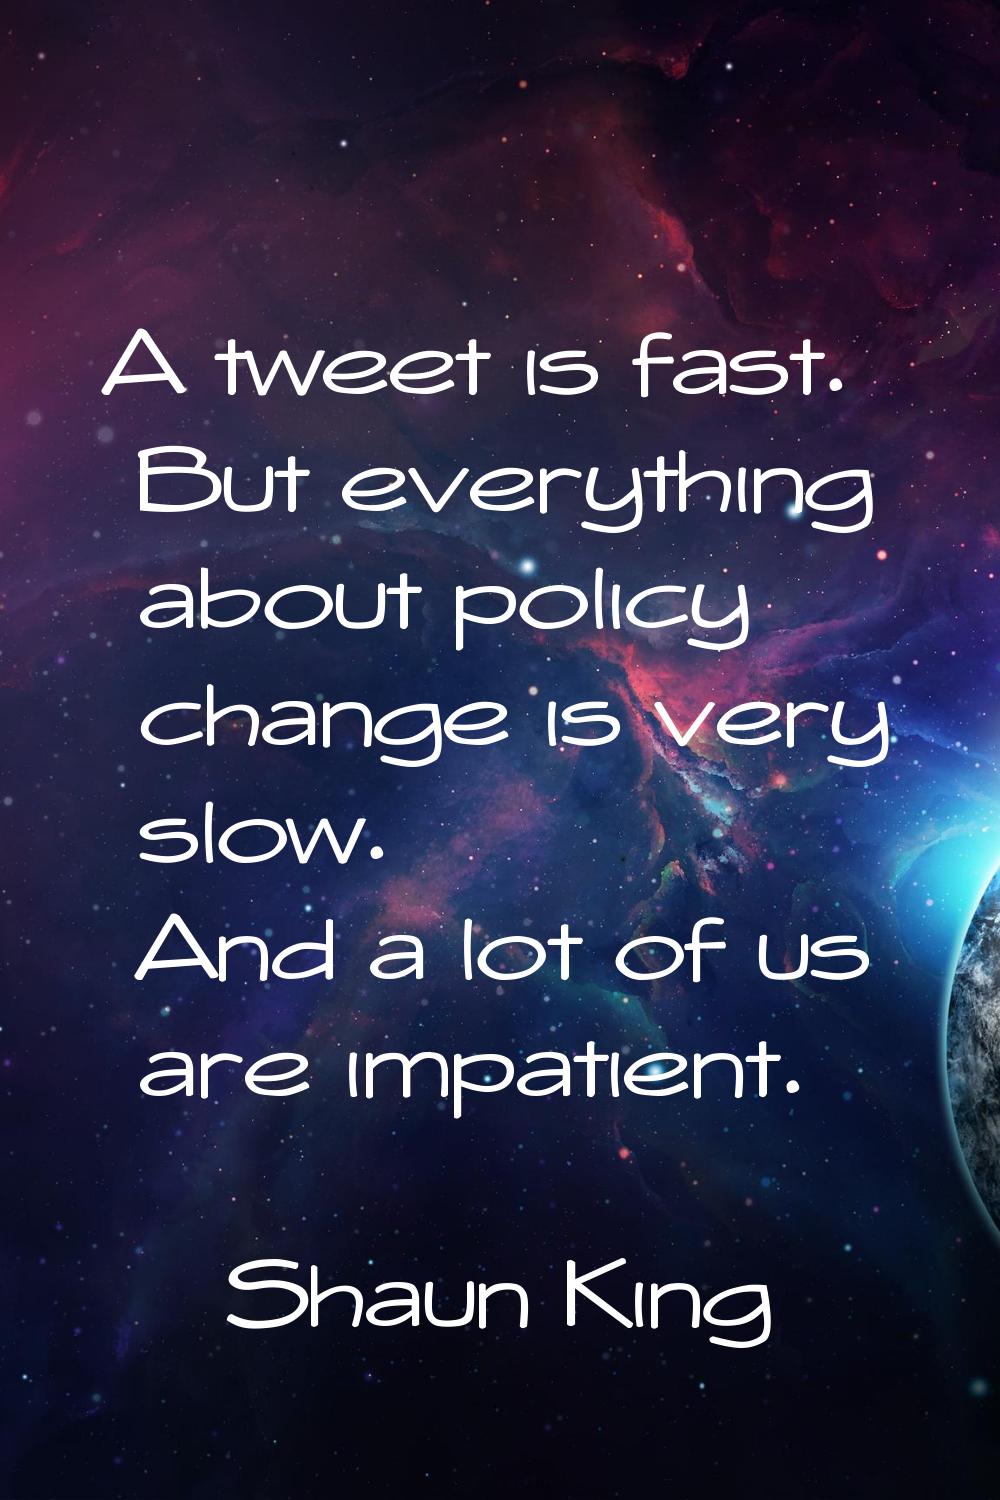 A tweet is fast. But everything about policy change is very slow. And a lot of us are impatient.